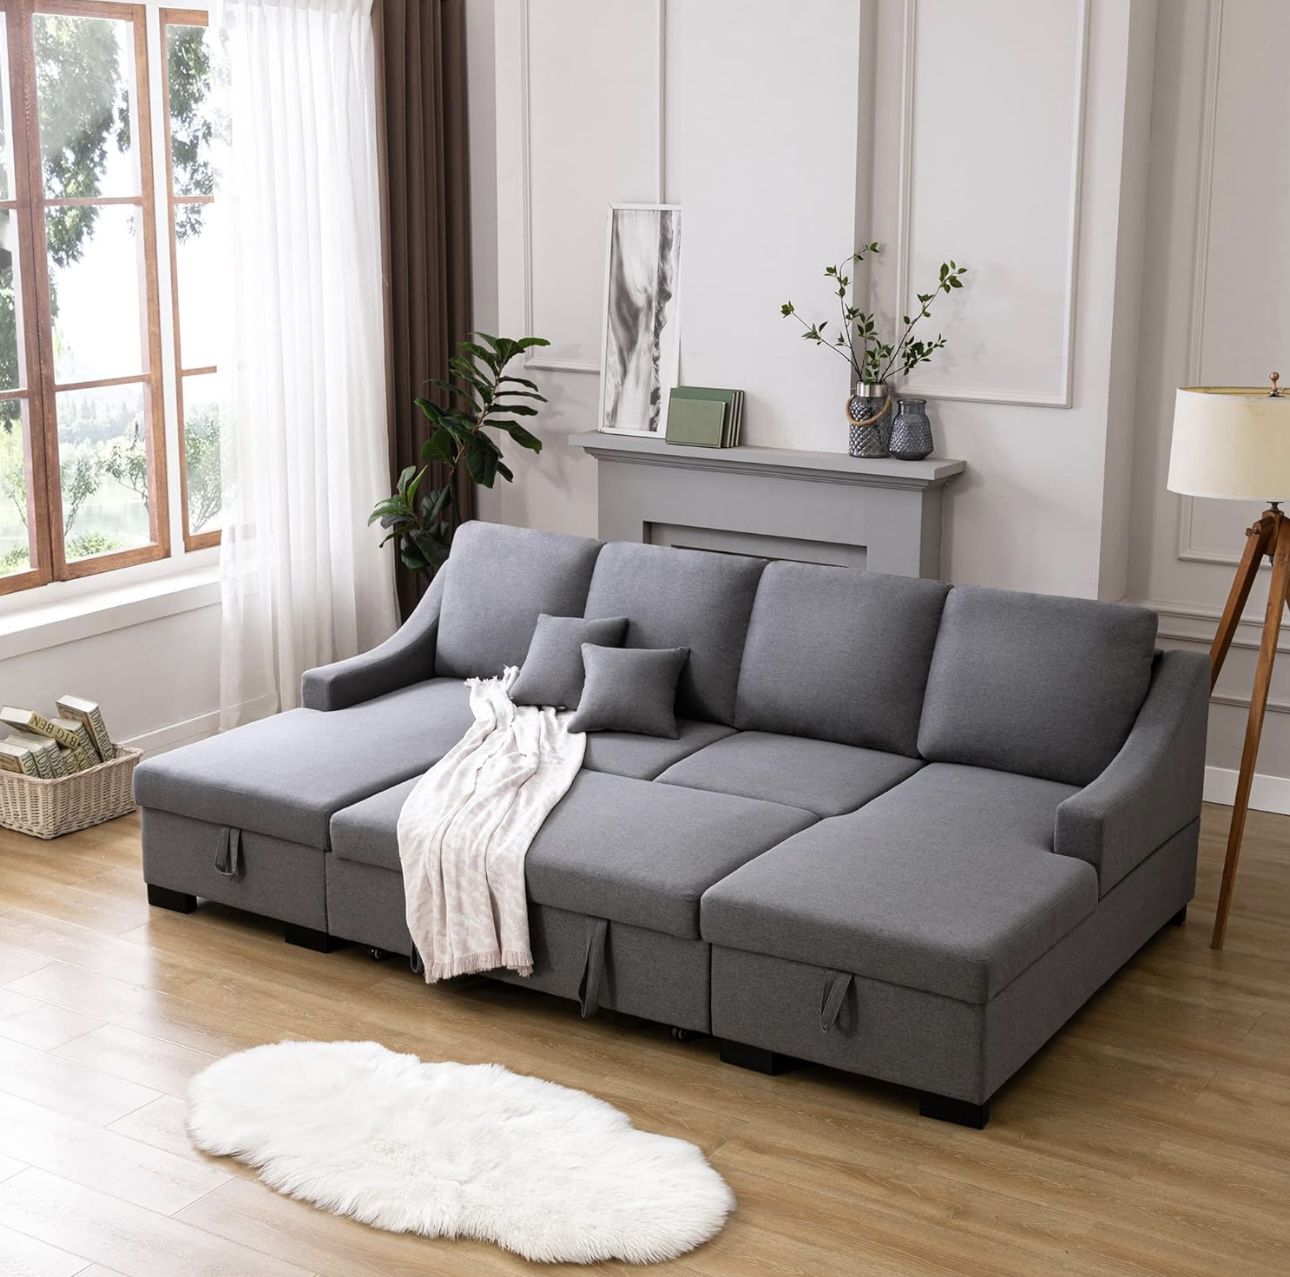 Upholstery Sectional Sofa Sleeper Sectional Couch Pull-Out Sofa Bed,U Shape Sectional Sofa with Double Storage Spaces and 2 Tossing Cushions 